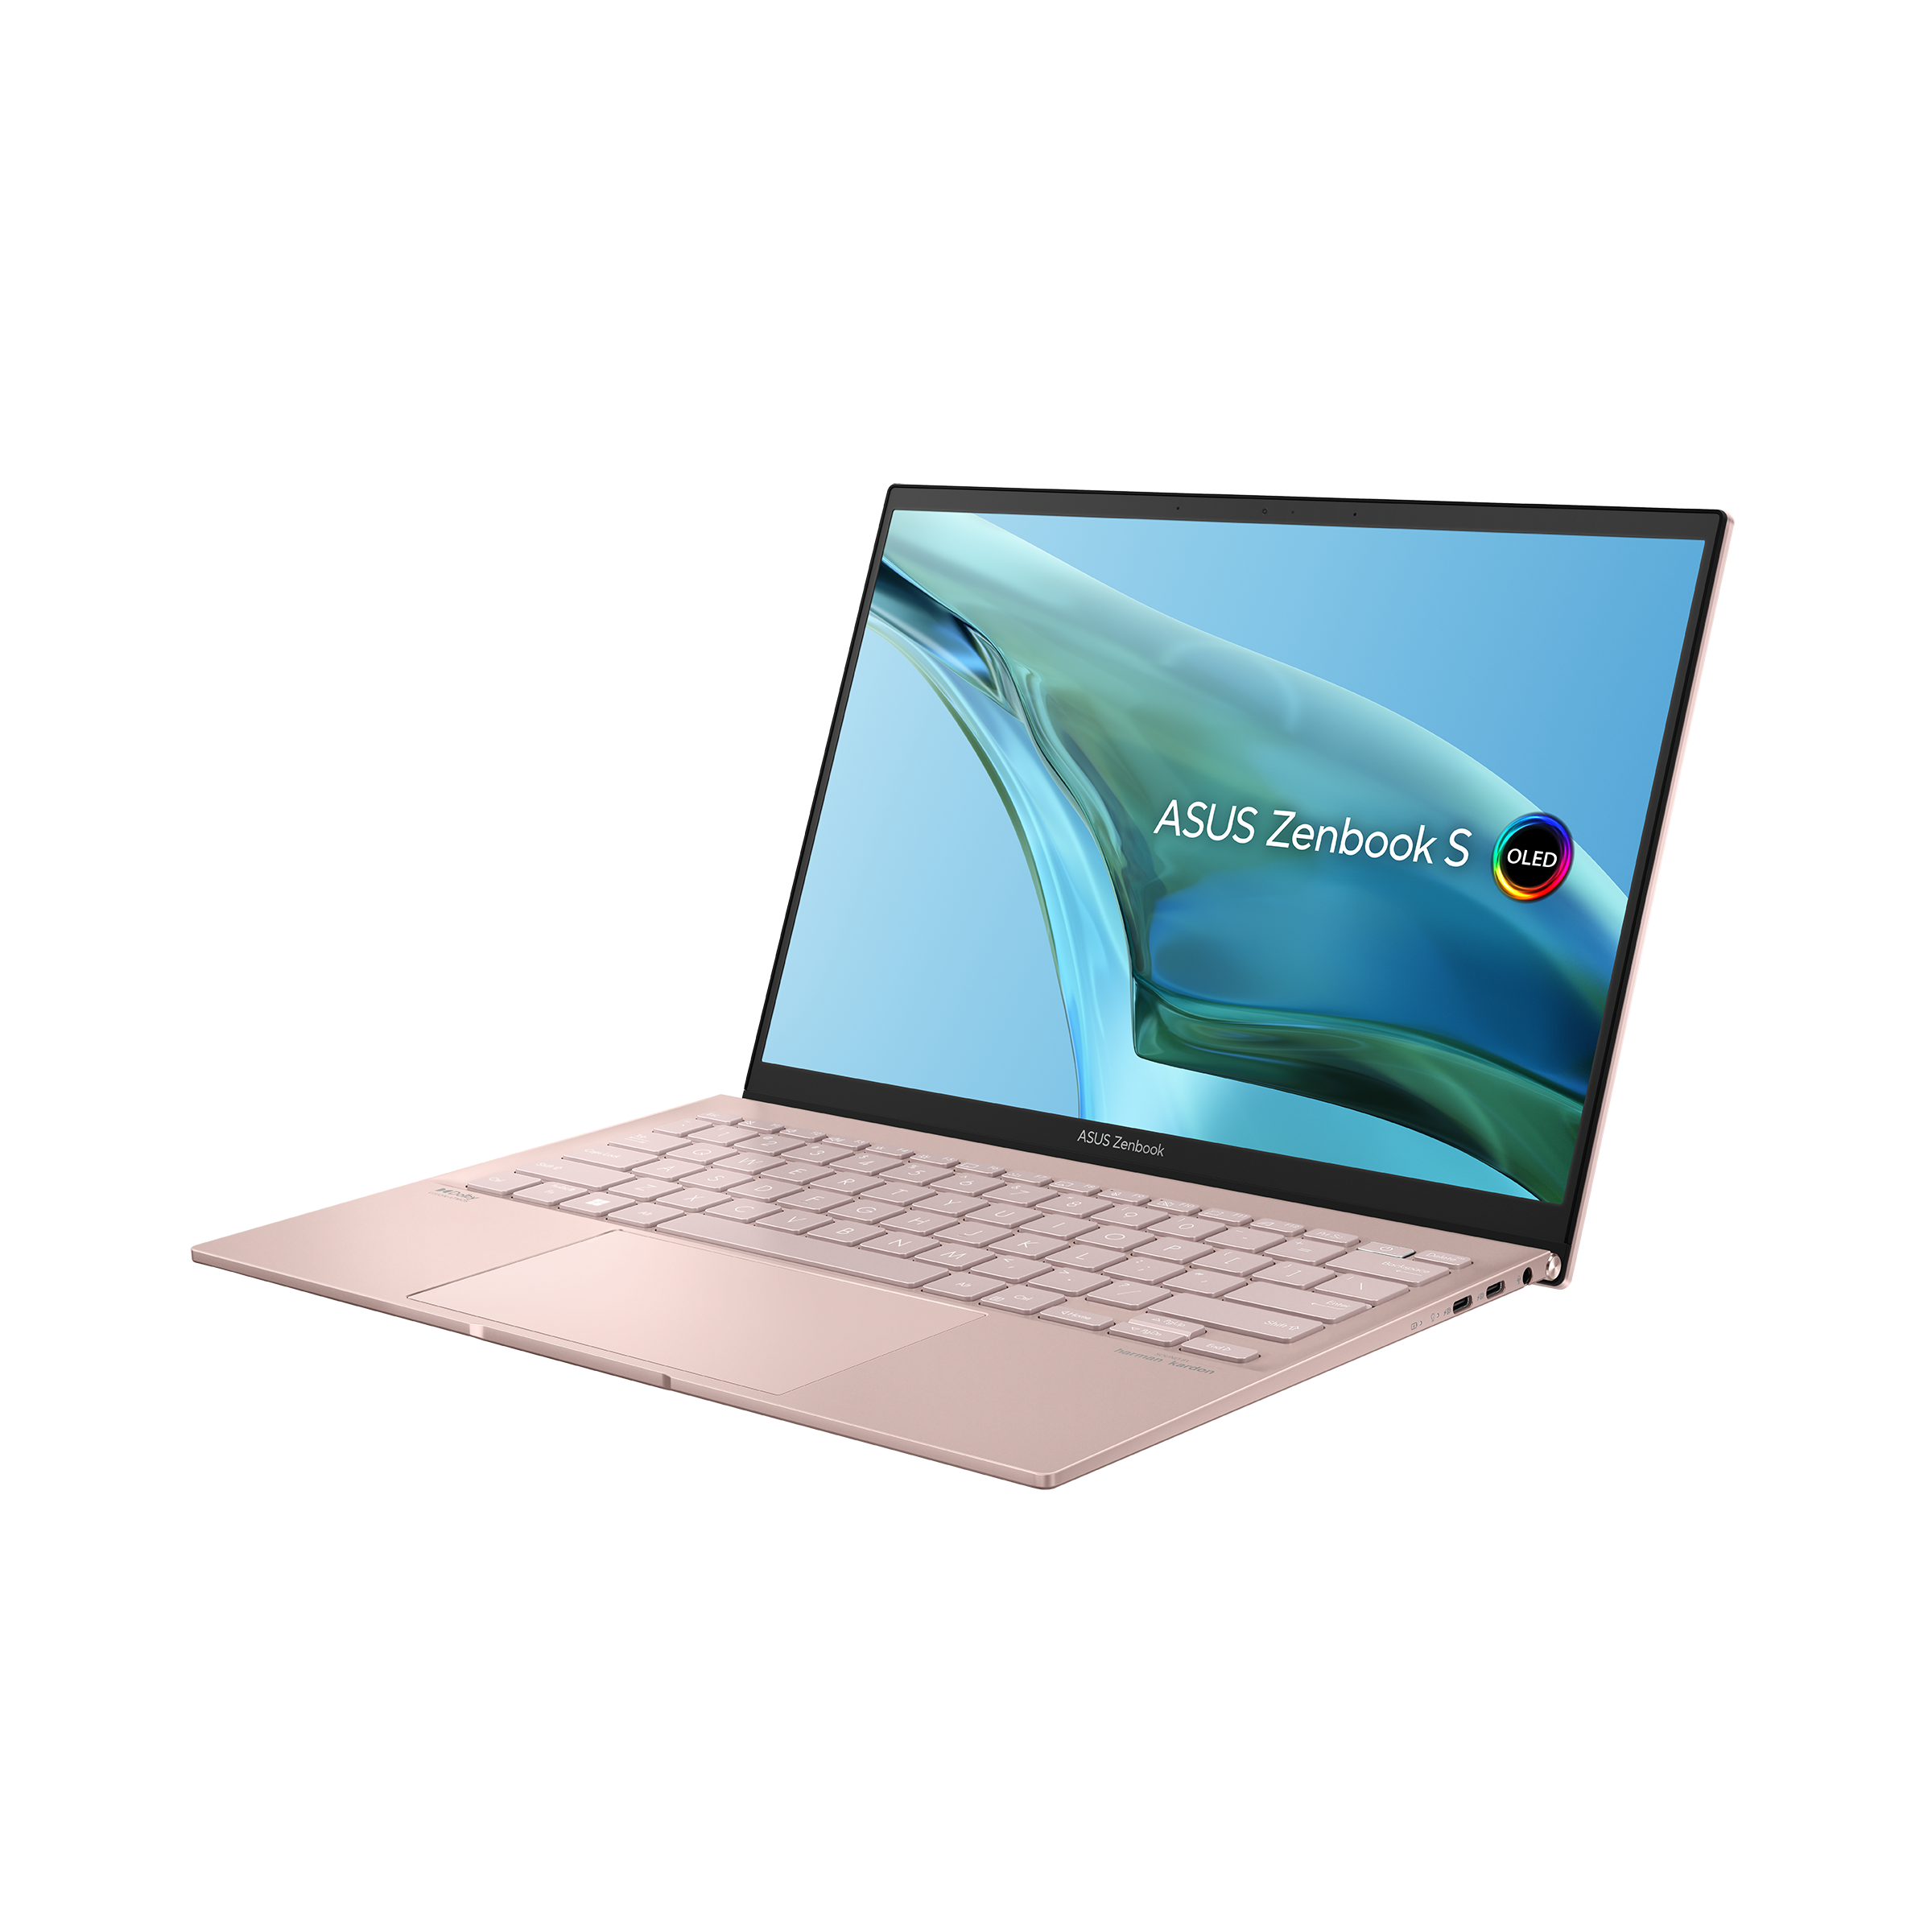 The Asus Zenbook S 13 OLED on a white background.The screen displays a multicolor desktop with the Asus Zenbook S OLED logo.